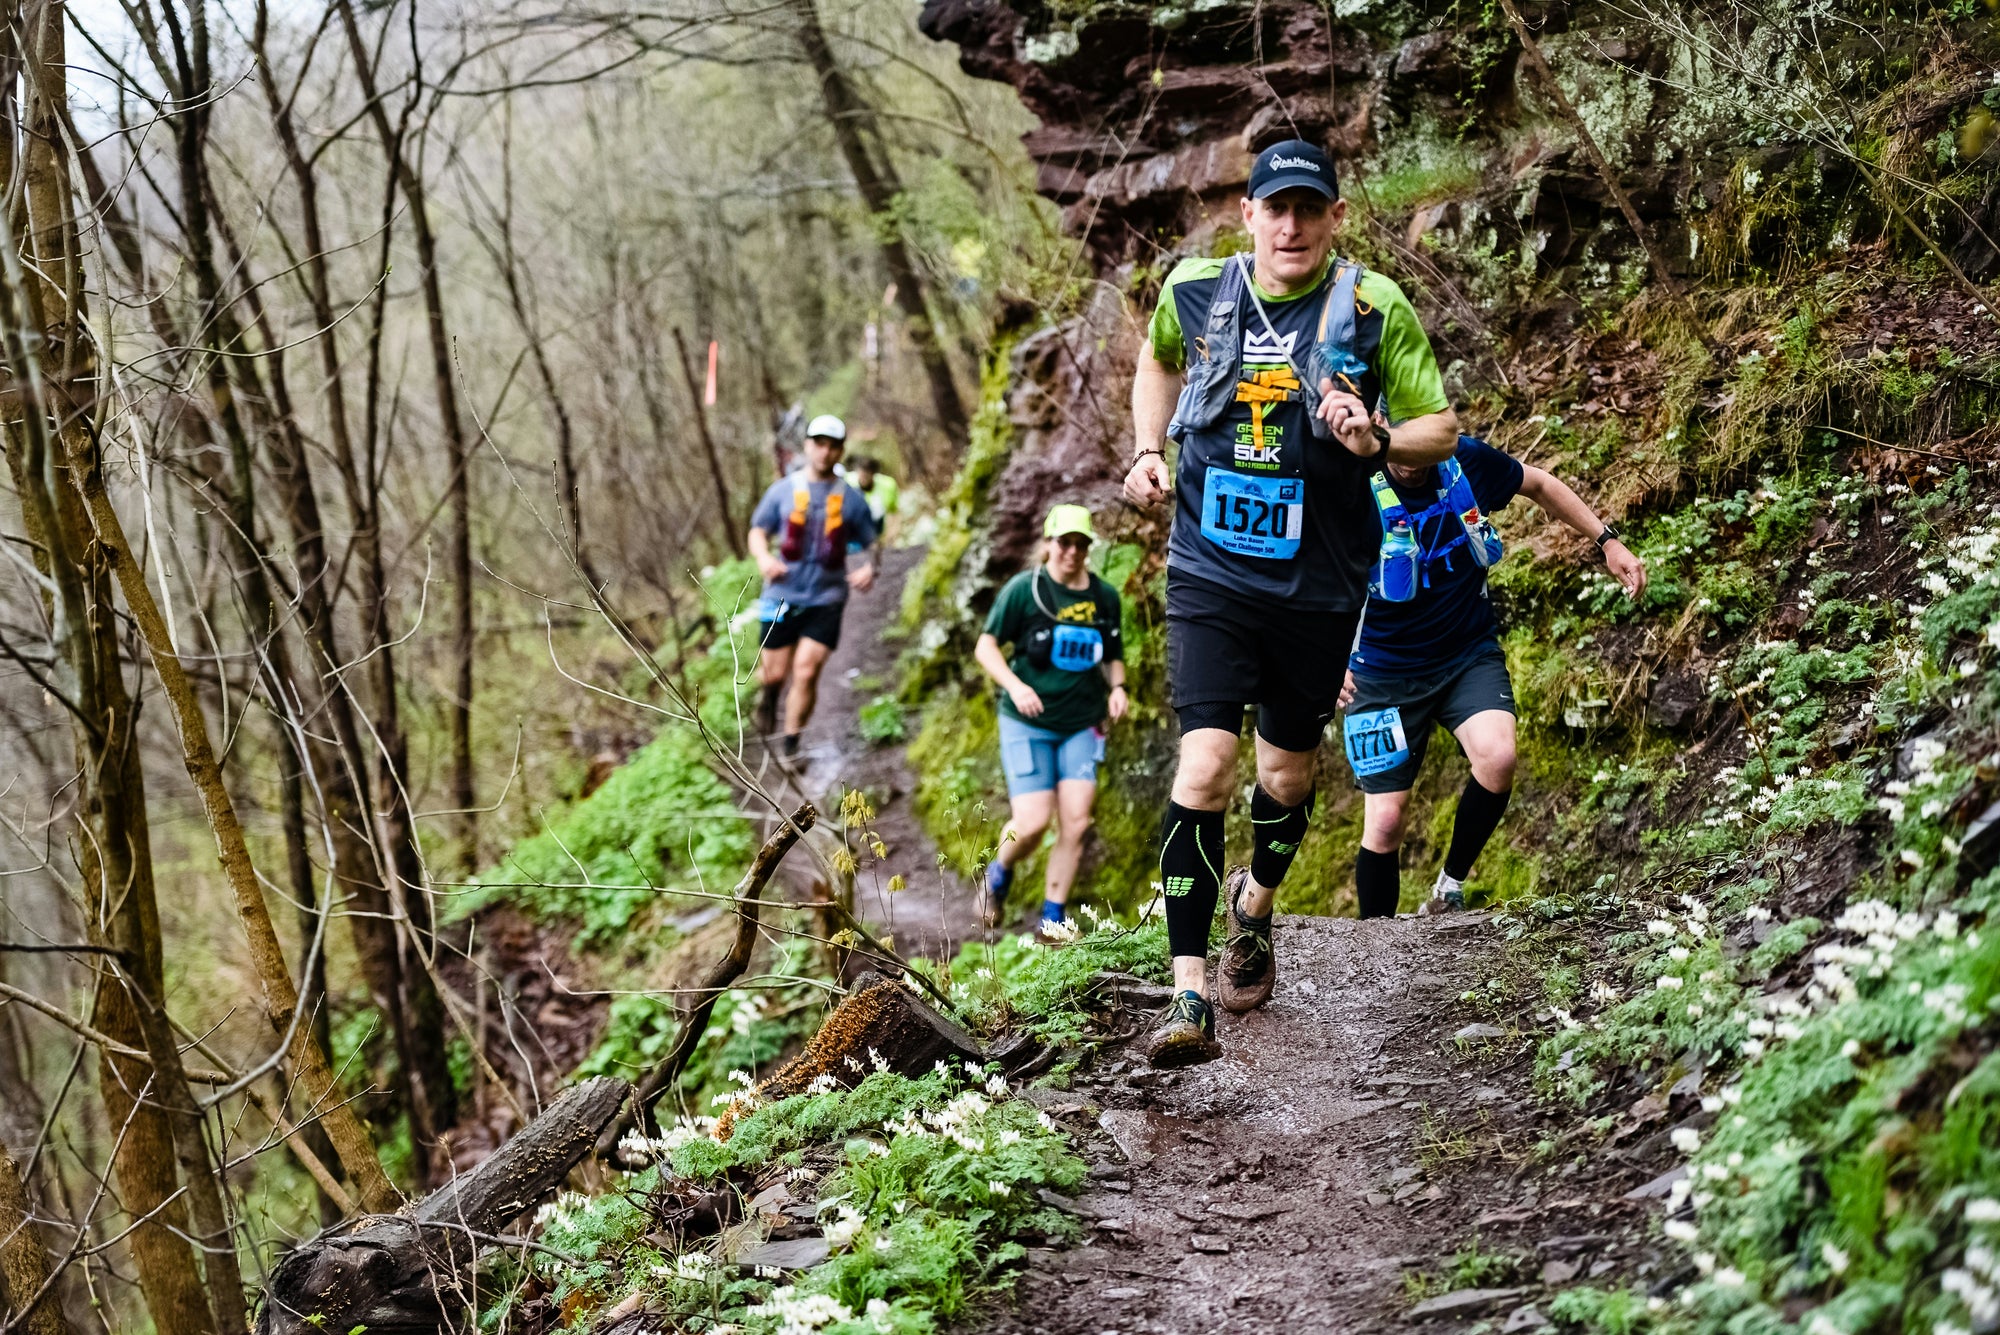 Trail runners geared up with hydration packs while running 